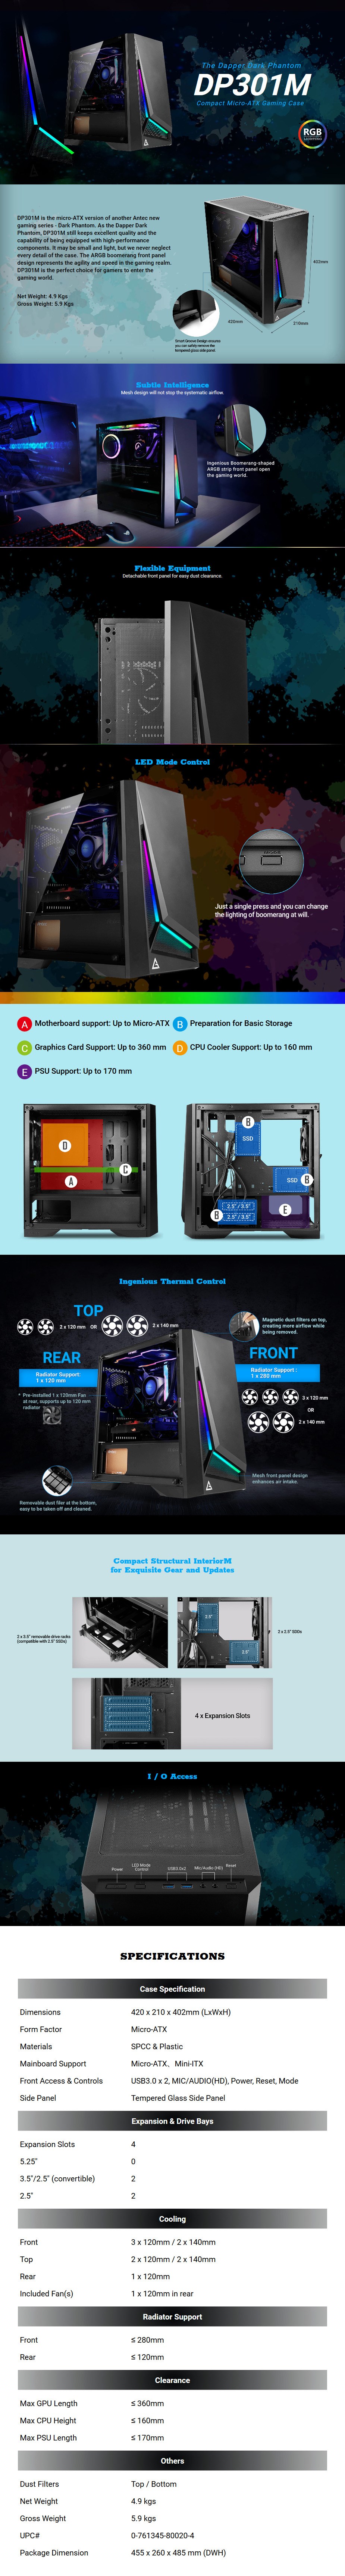 Antec DP301MA RGB Tempered Glass Compact Micro-ATX Case - Desktop Overview 1